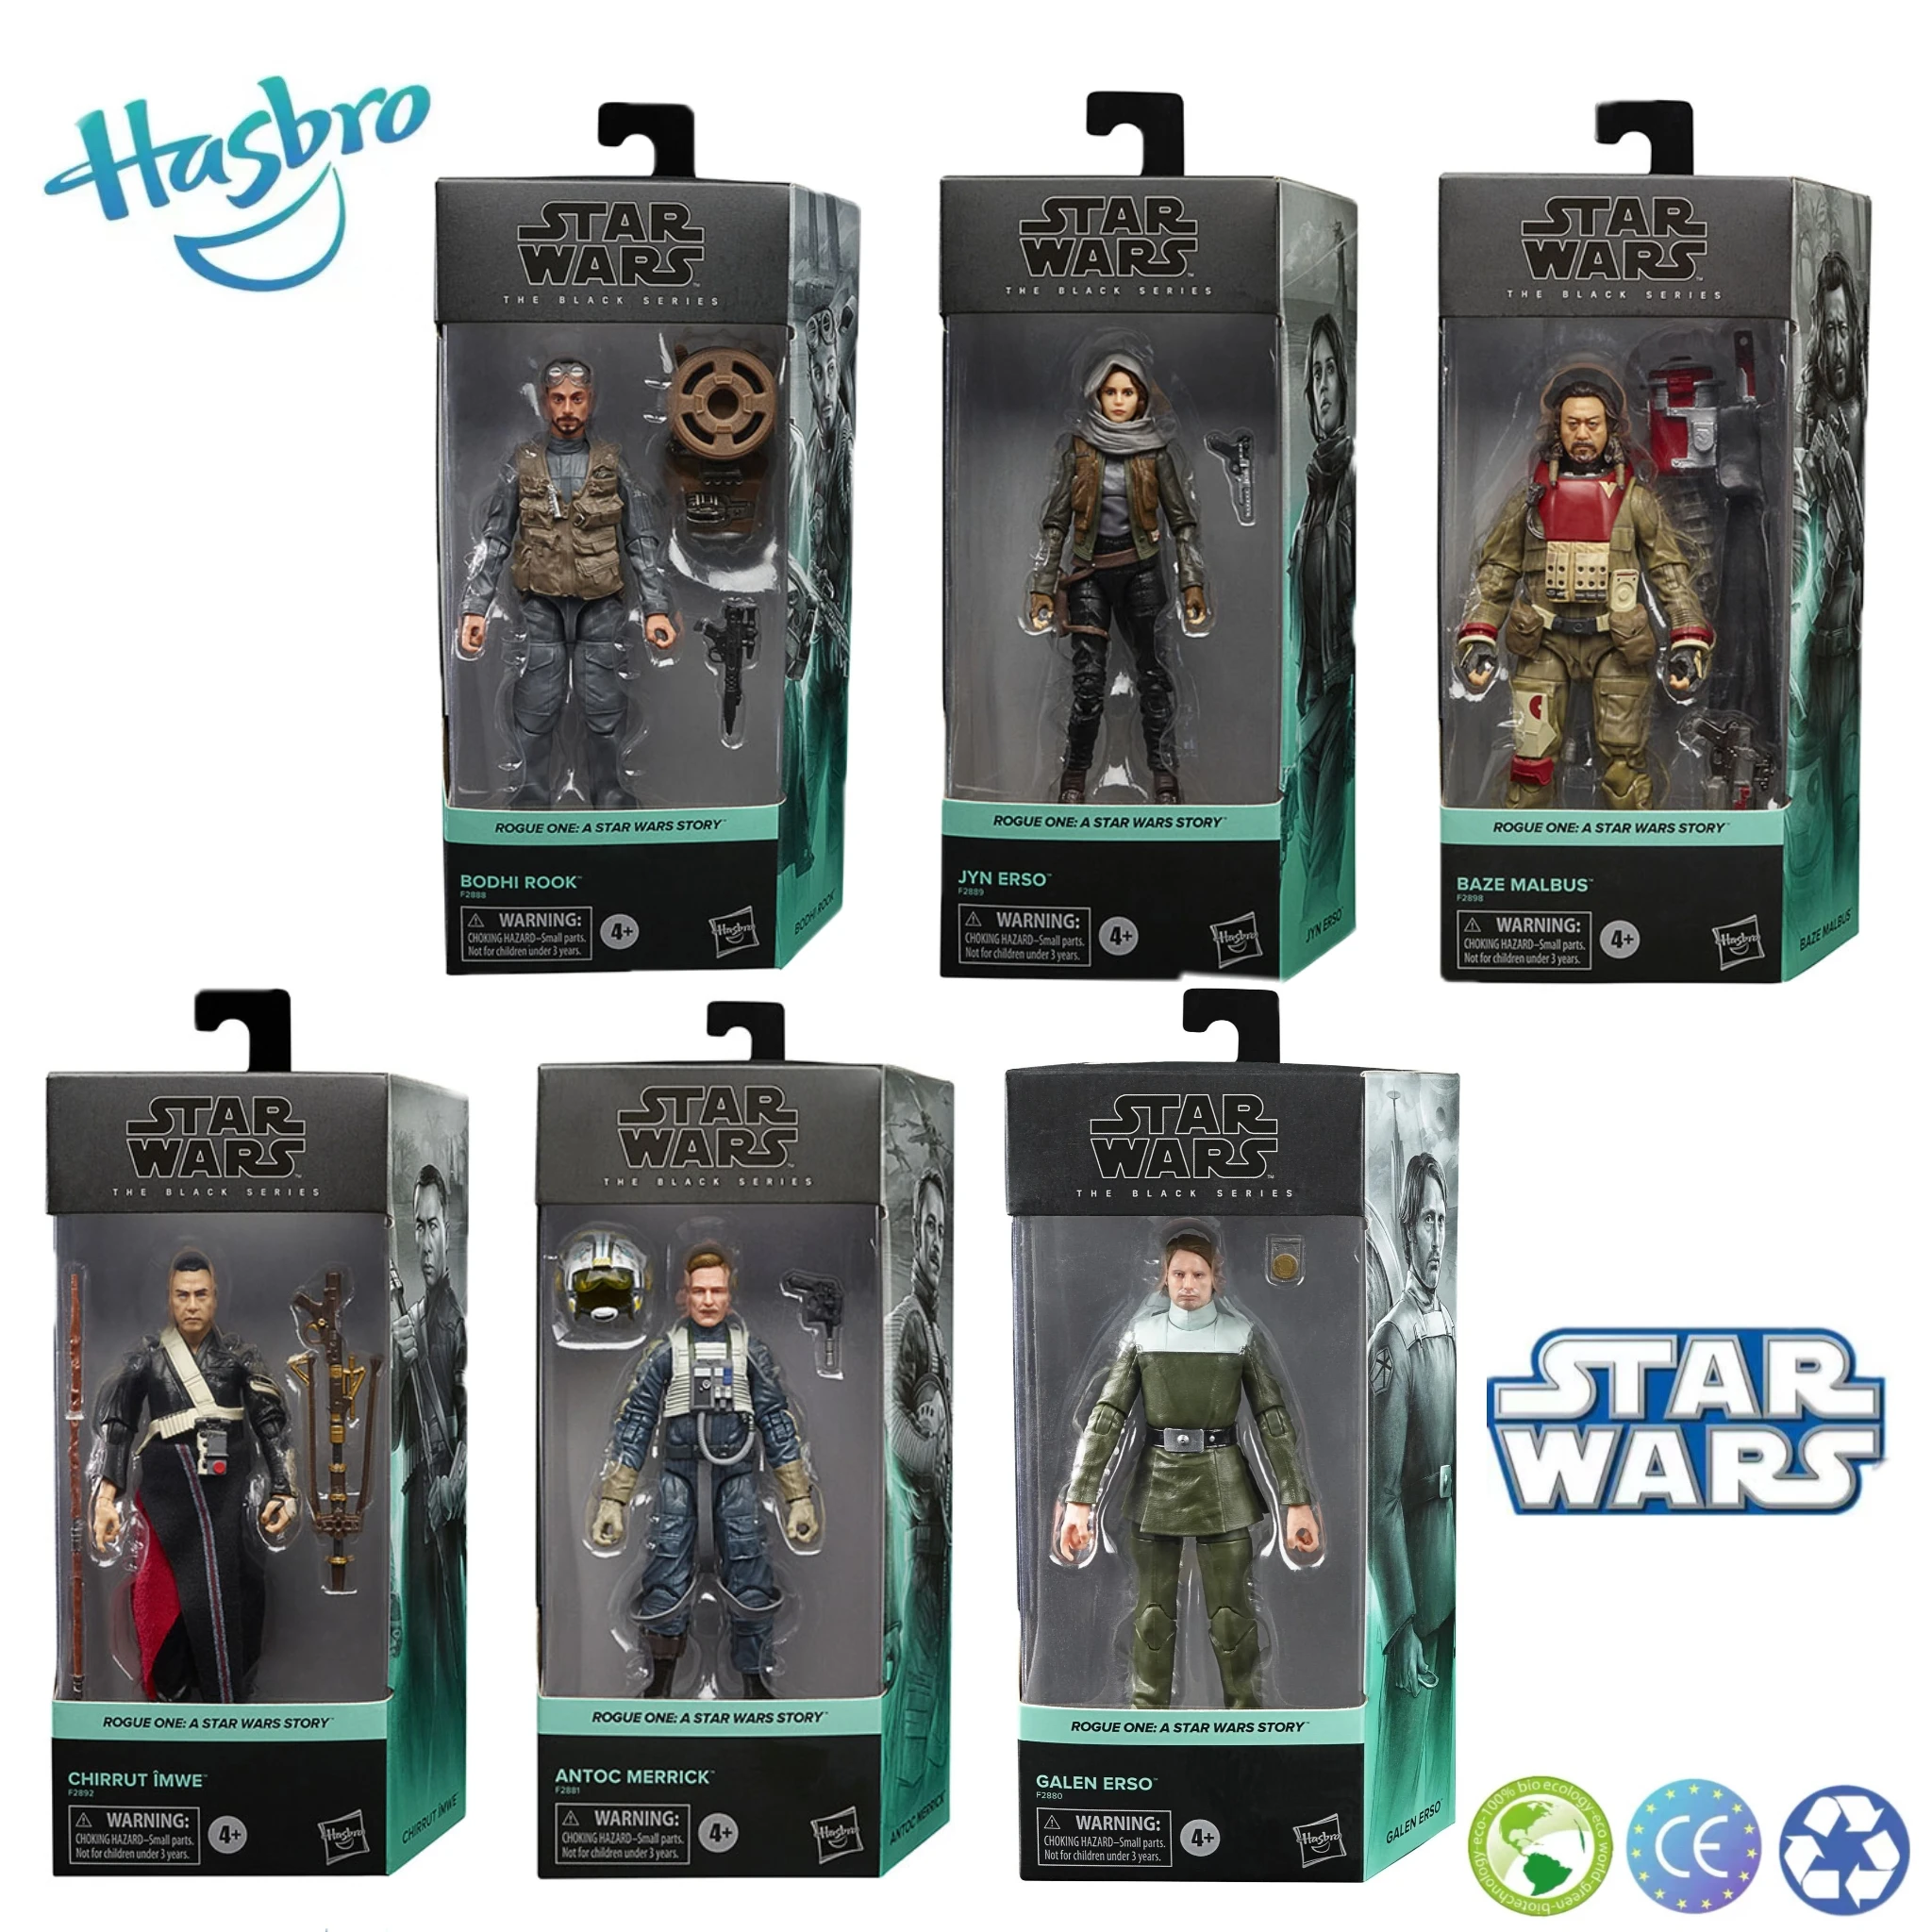 

Star Wars Rogue One Black Series Antoc Merrick GalenErso Baze Malbus Action Figures Toys for Kids with Box 6-Inch-Scale